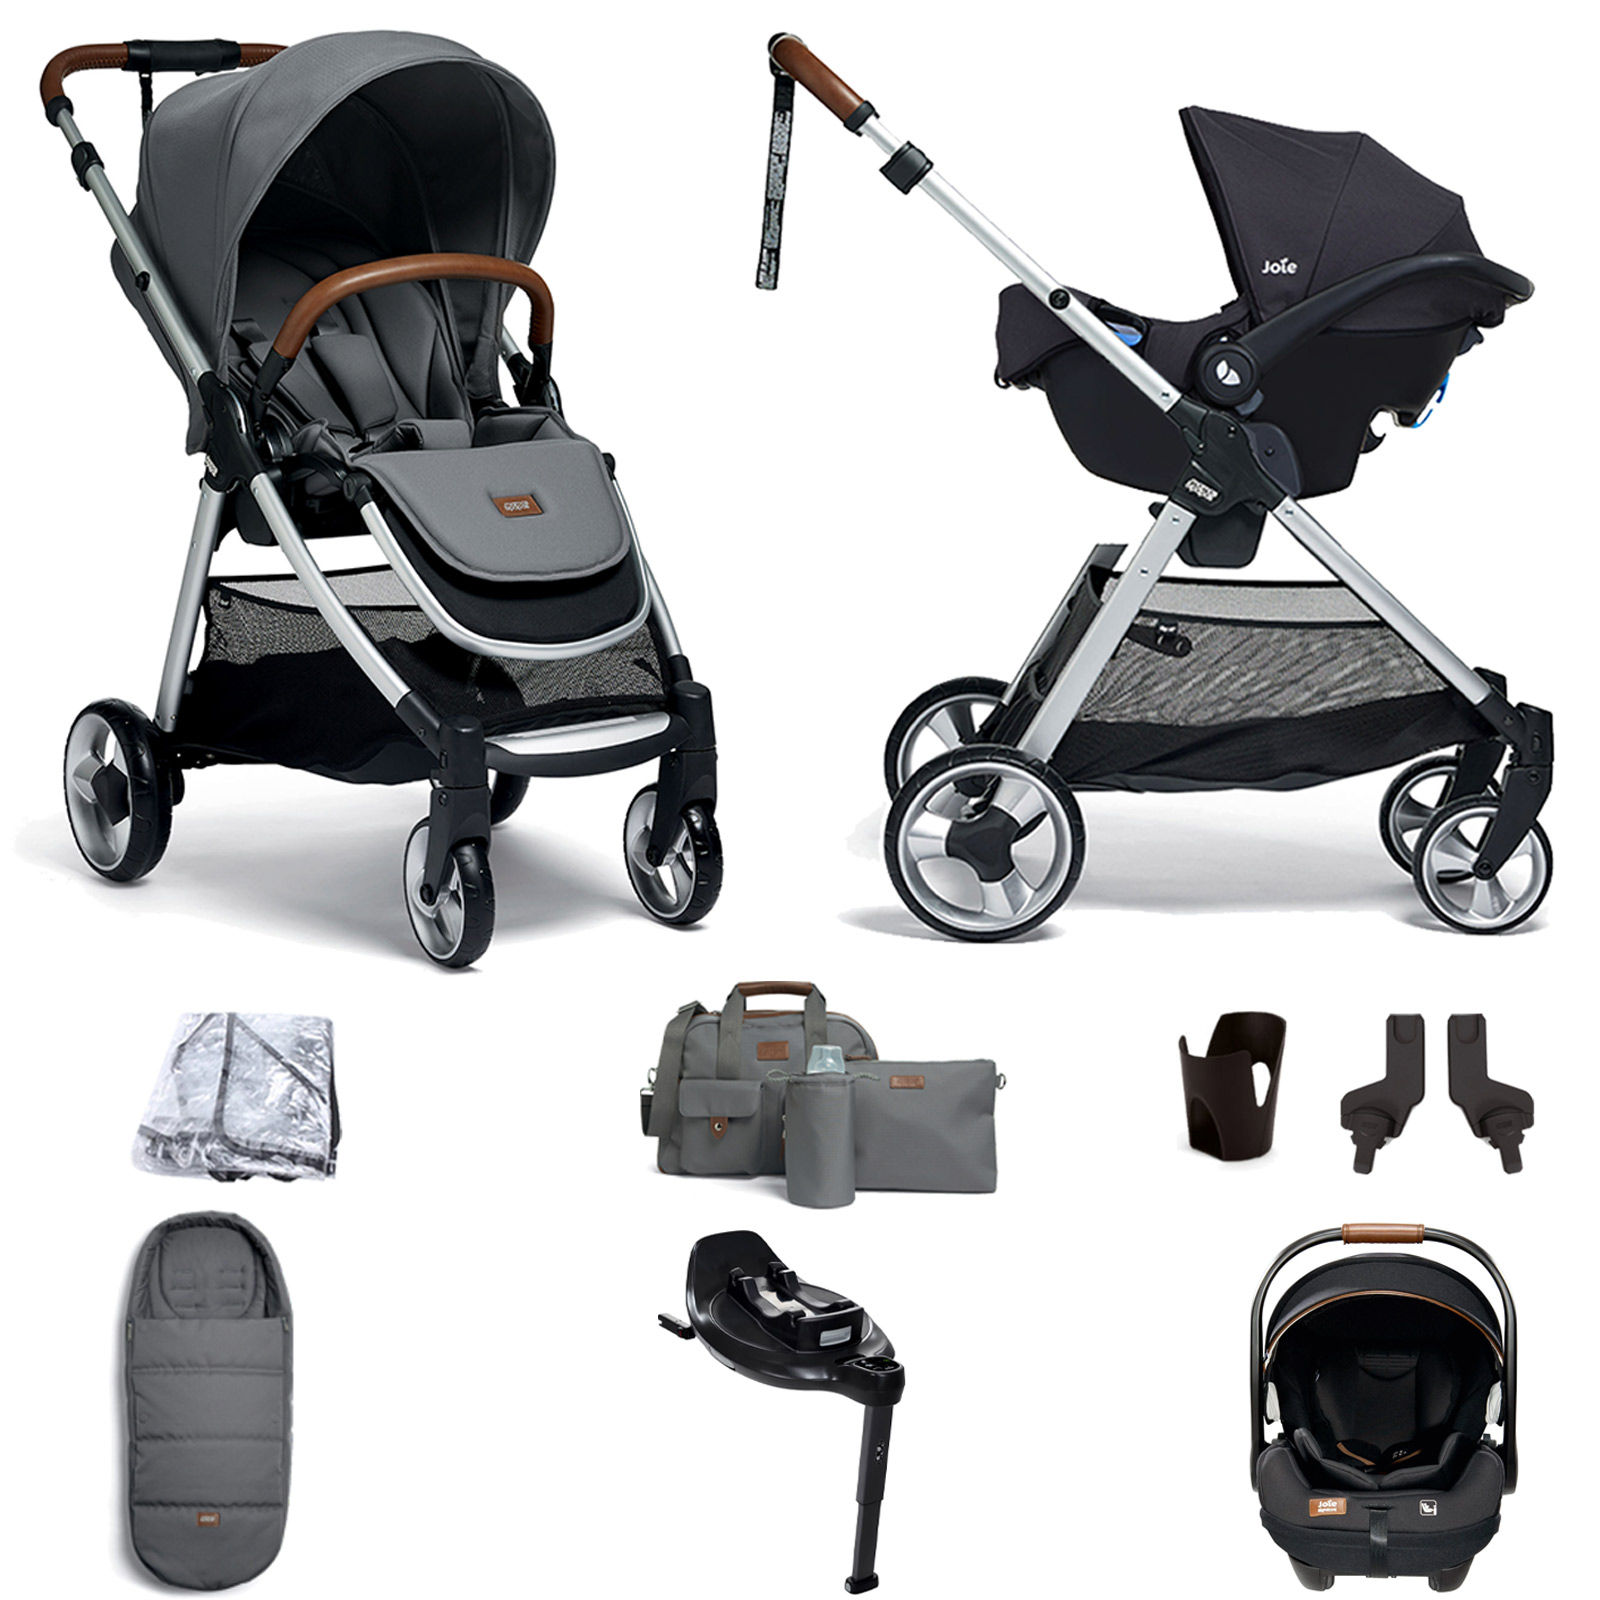 Mamas & Papas Flip XT2 Travel System with Accessories, i-Level Recline Car Seat & i-Base Encore - Fossil Grey